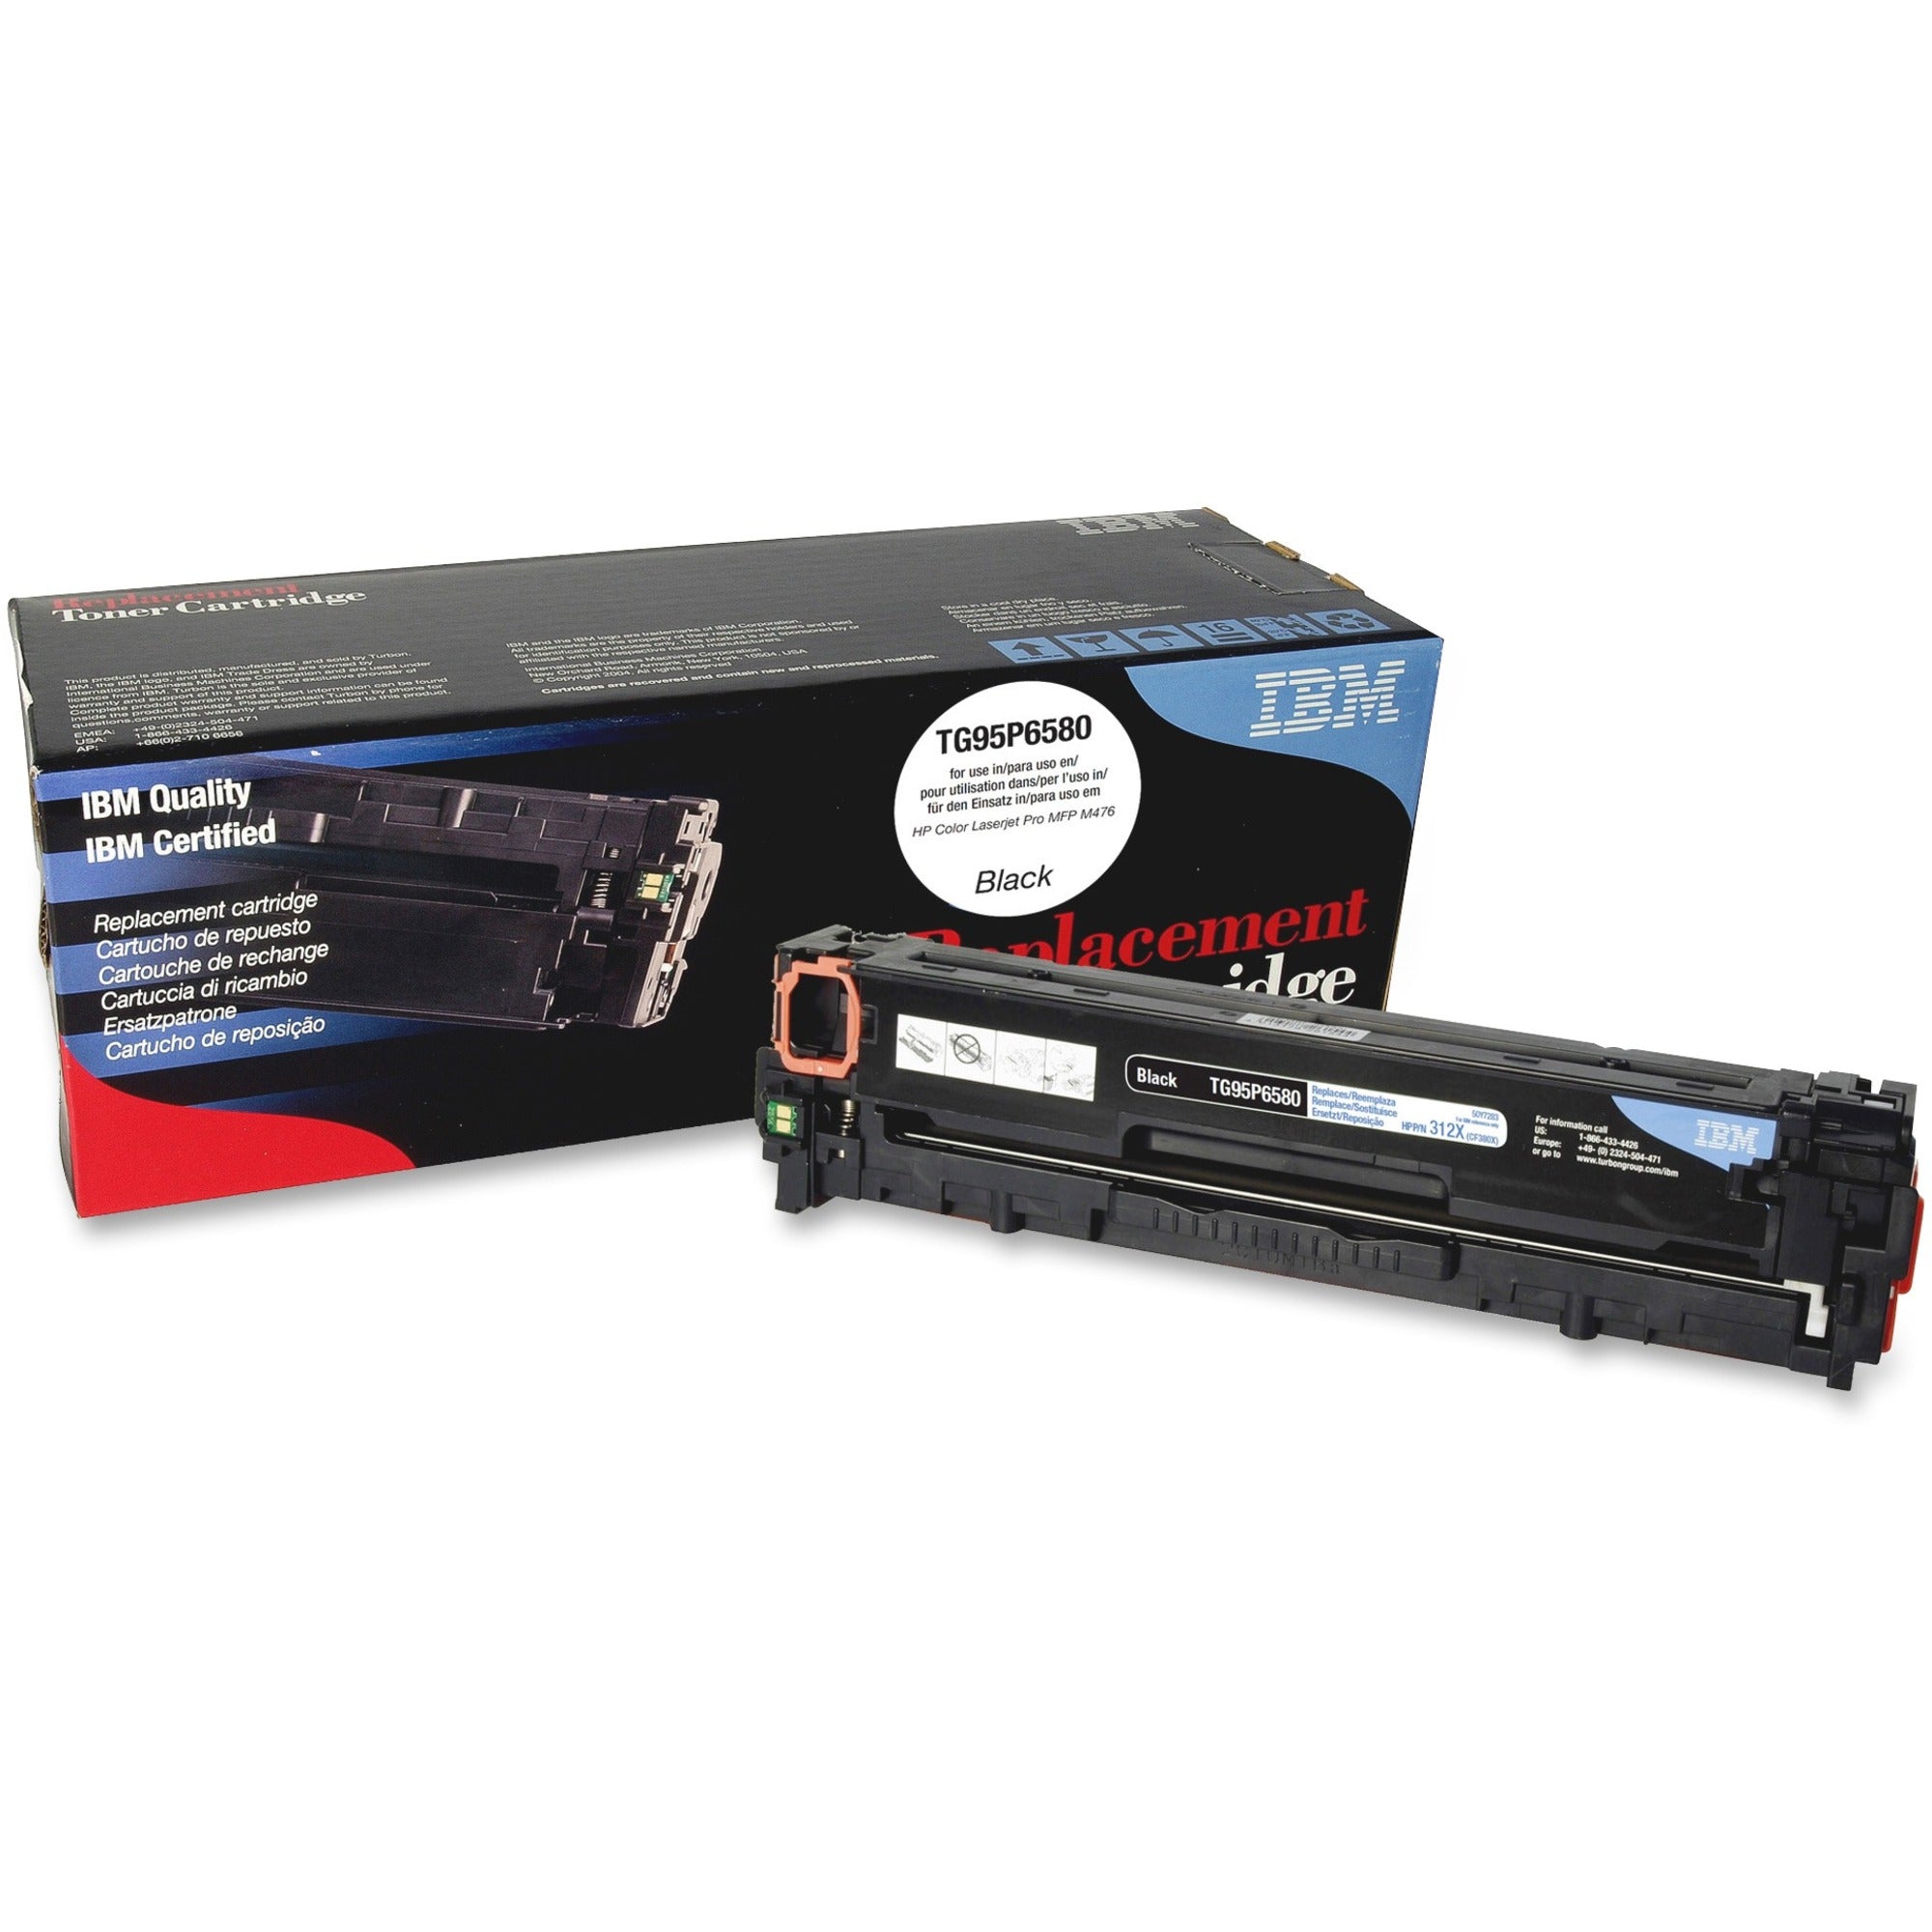 IBM Remanufactured High Yield Laser Toner Cartridge - Alternative for HP 312X (CF380X) - Black - 1 Each - 4400 Pages - 